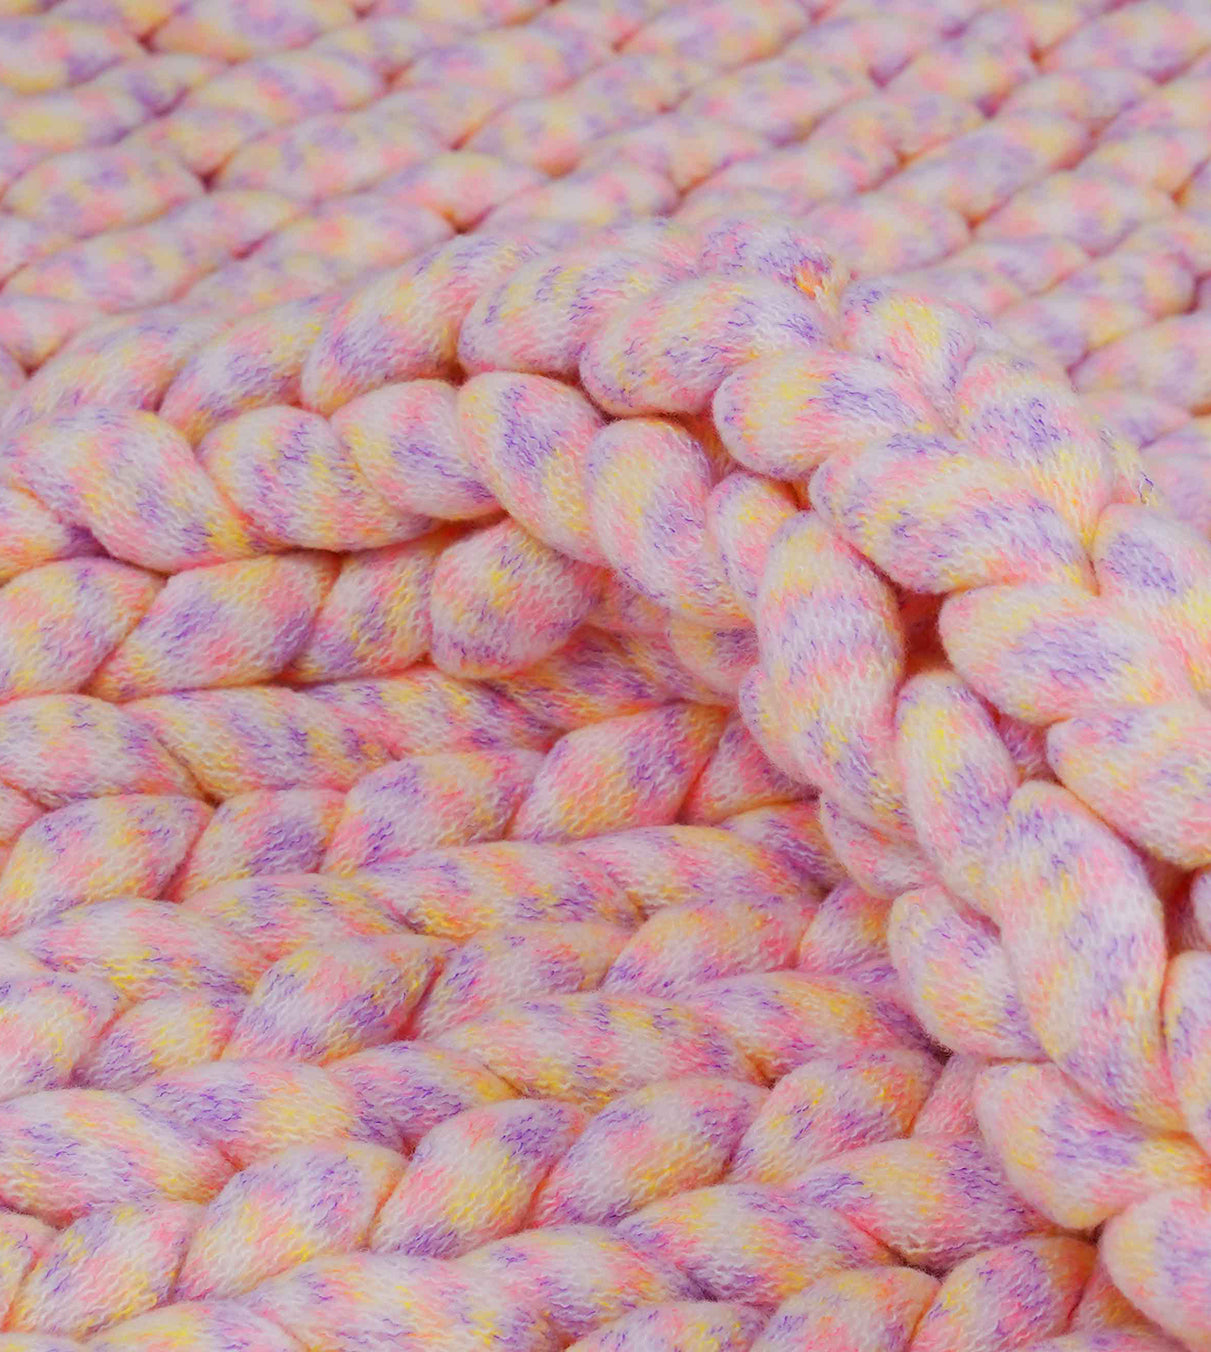 Product: Knitted Weighted Blanket | Color: Pink Carnival